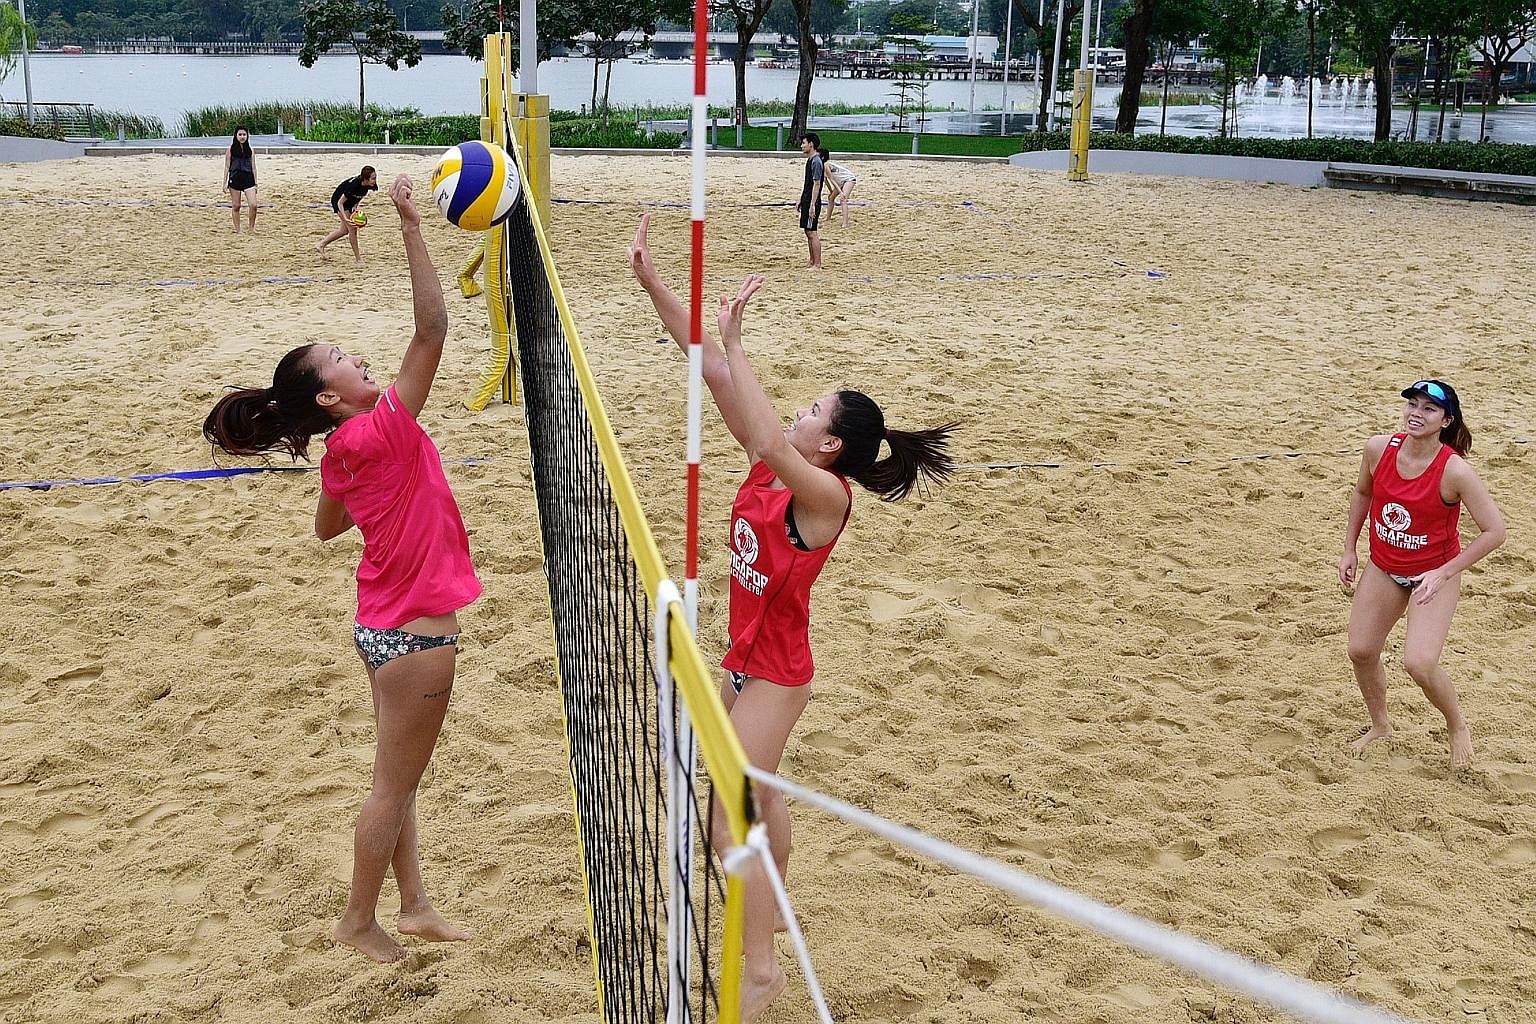 National beach volleyball players Serene Ng (left) and Vanessa Lim training at the Singapore Sports Hub even as temperatures hit lows of 22 deg C on Thursday. Six players are competing for two spots on the Commonwealth Games team, should the Singapor